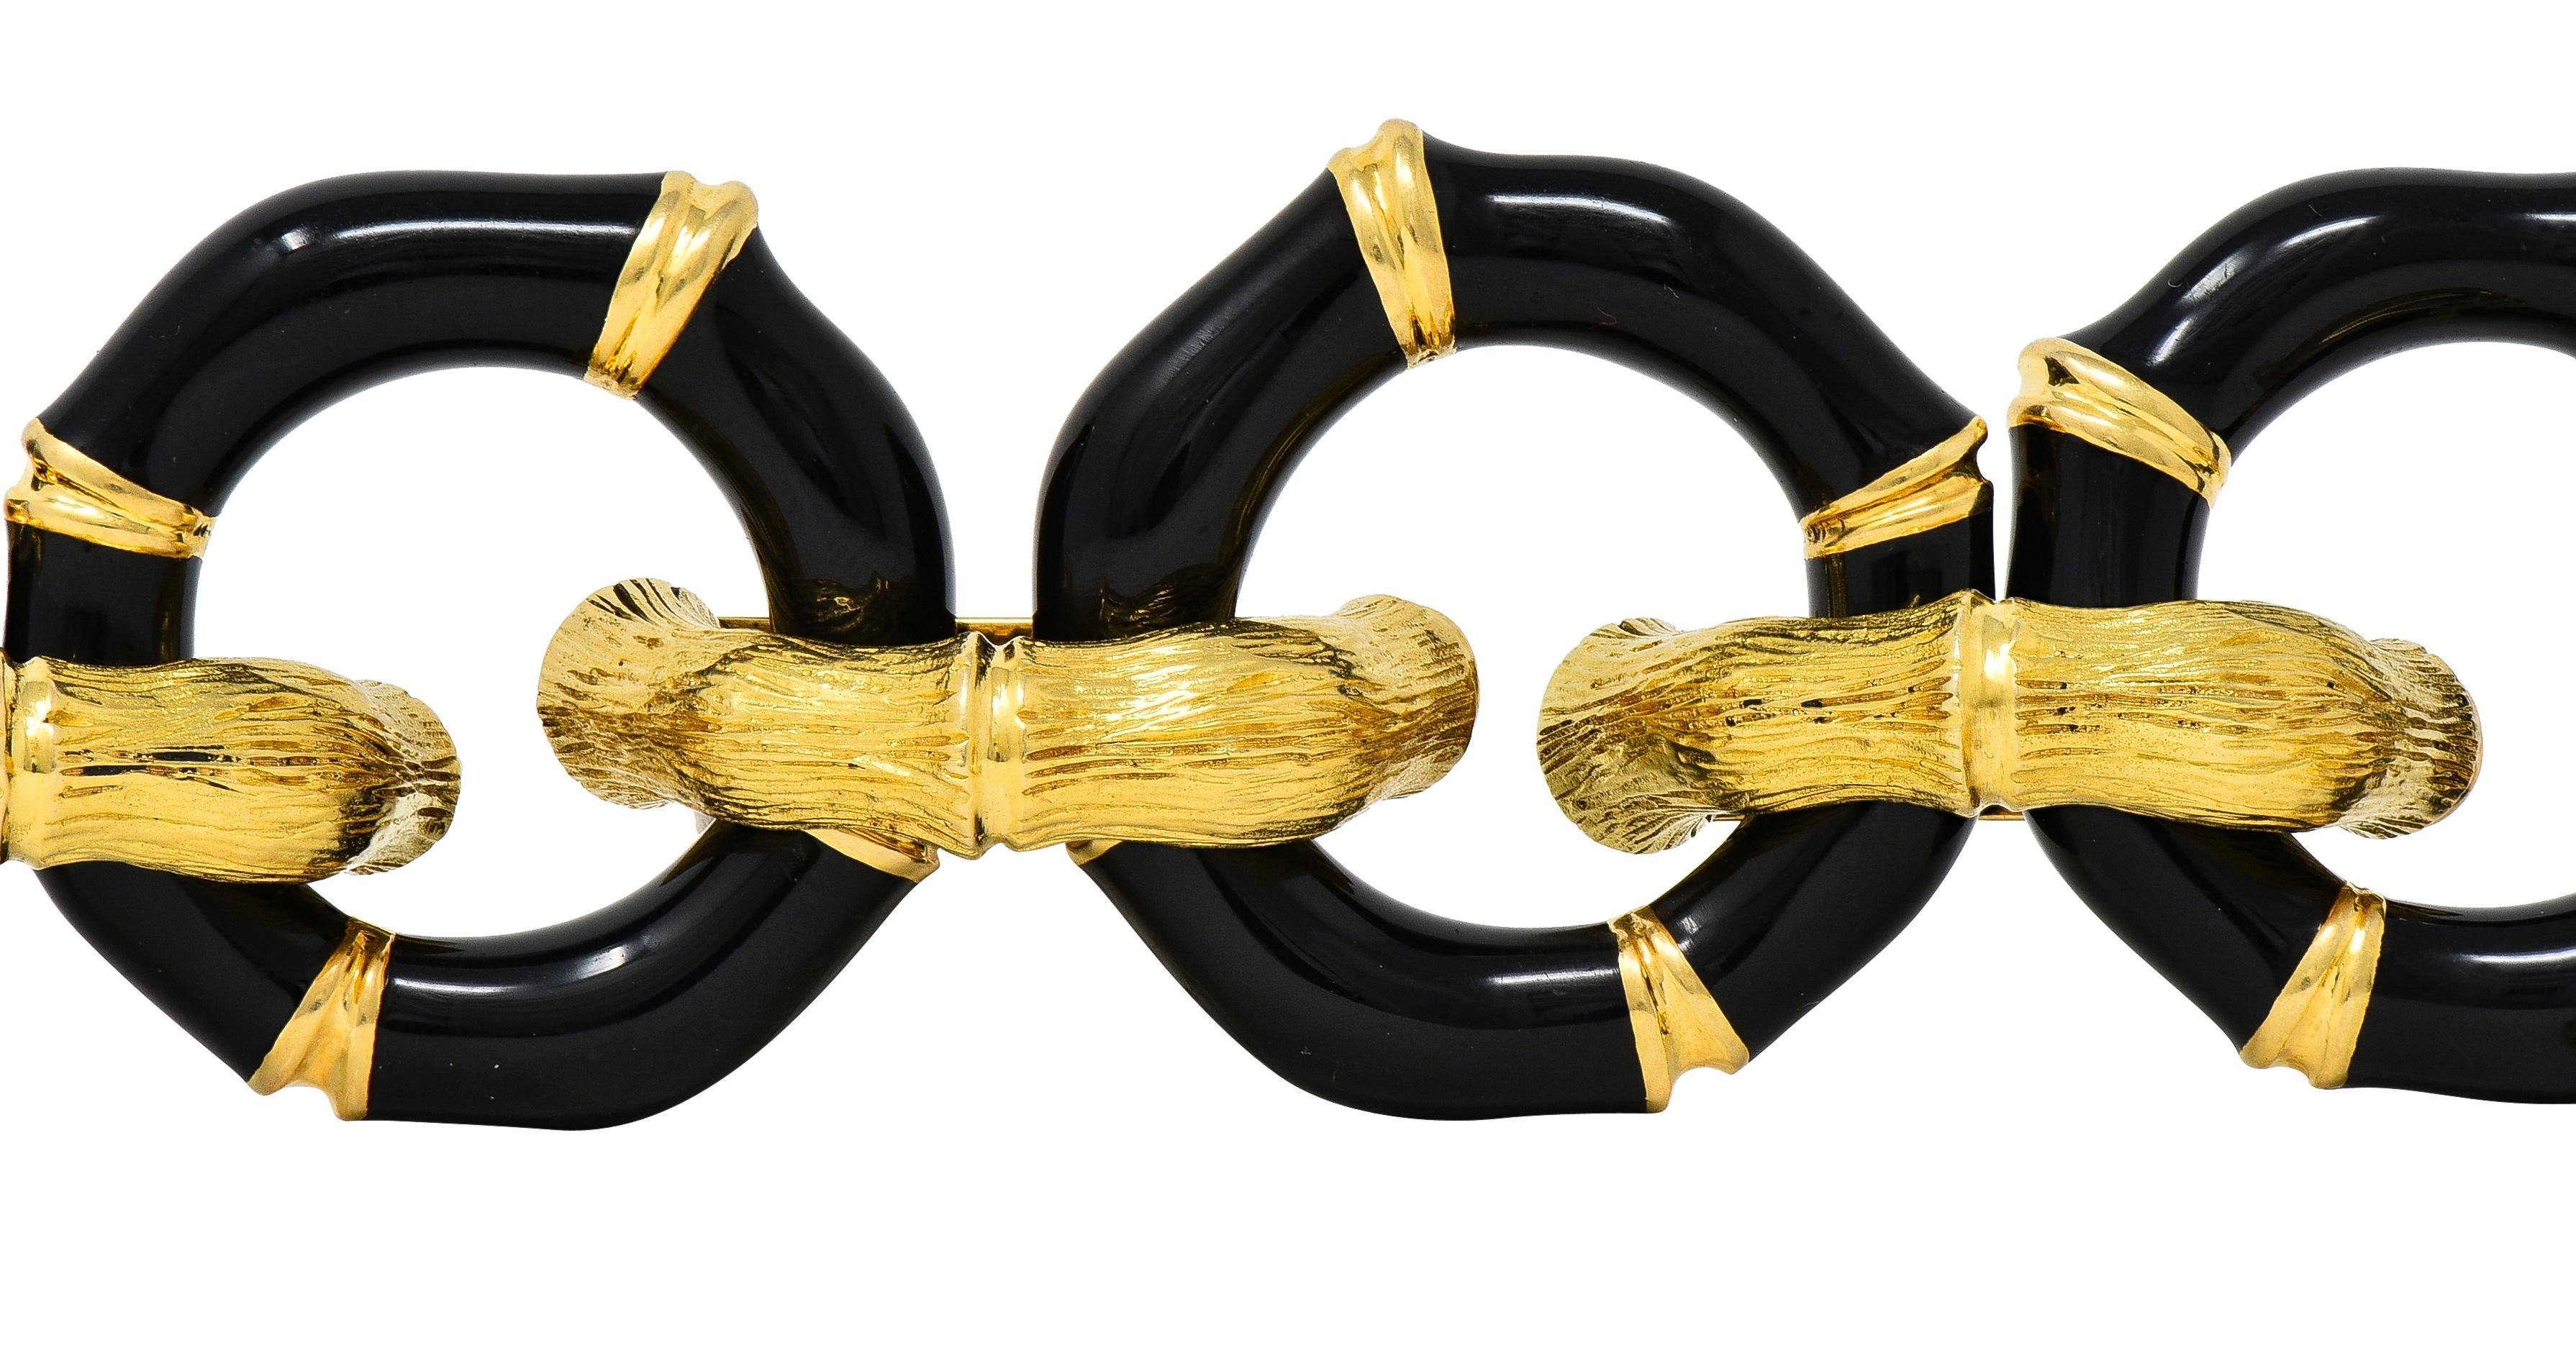 Gucci 2000's Enamel 18 Karat Yellow Gold Bamboo Vintage Link Bracelet In Excellent Condition For Sale In Philadelphia, PA